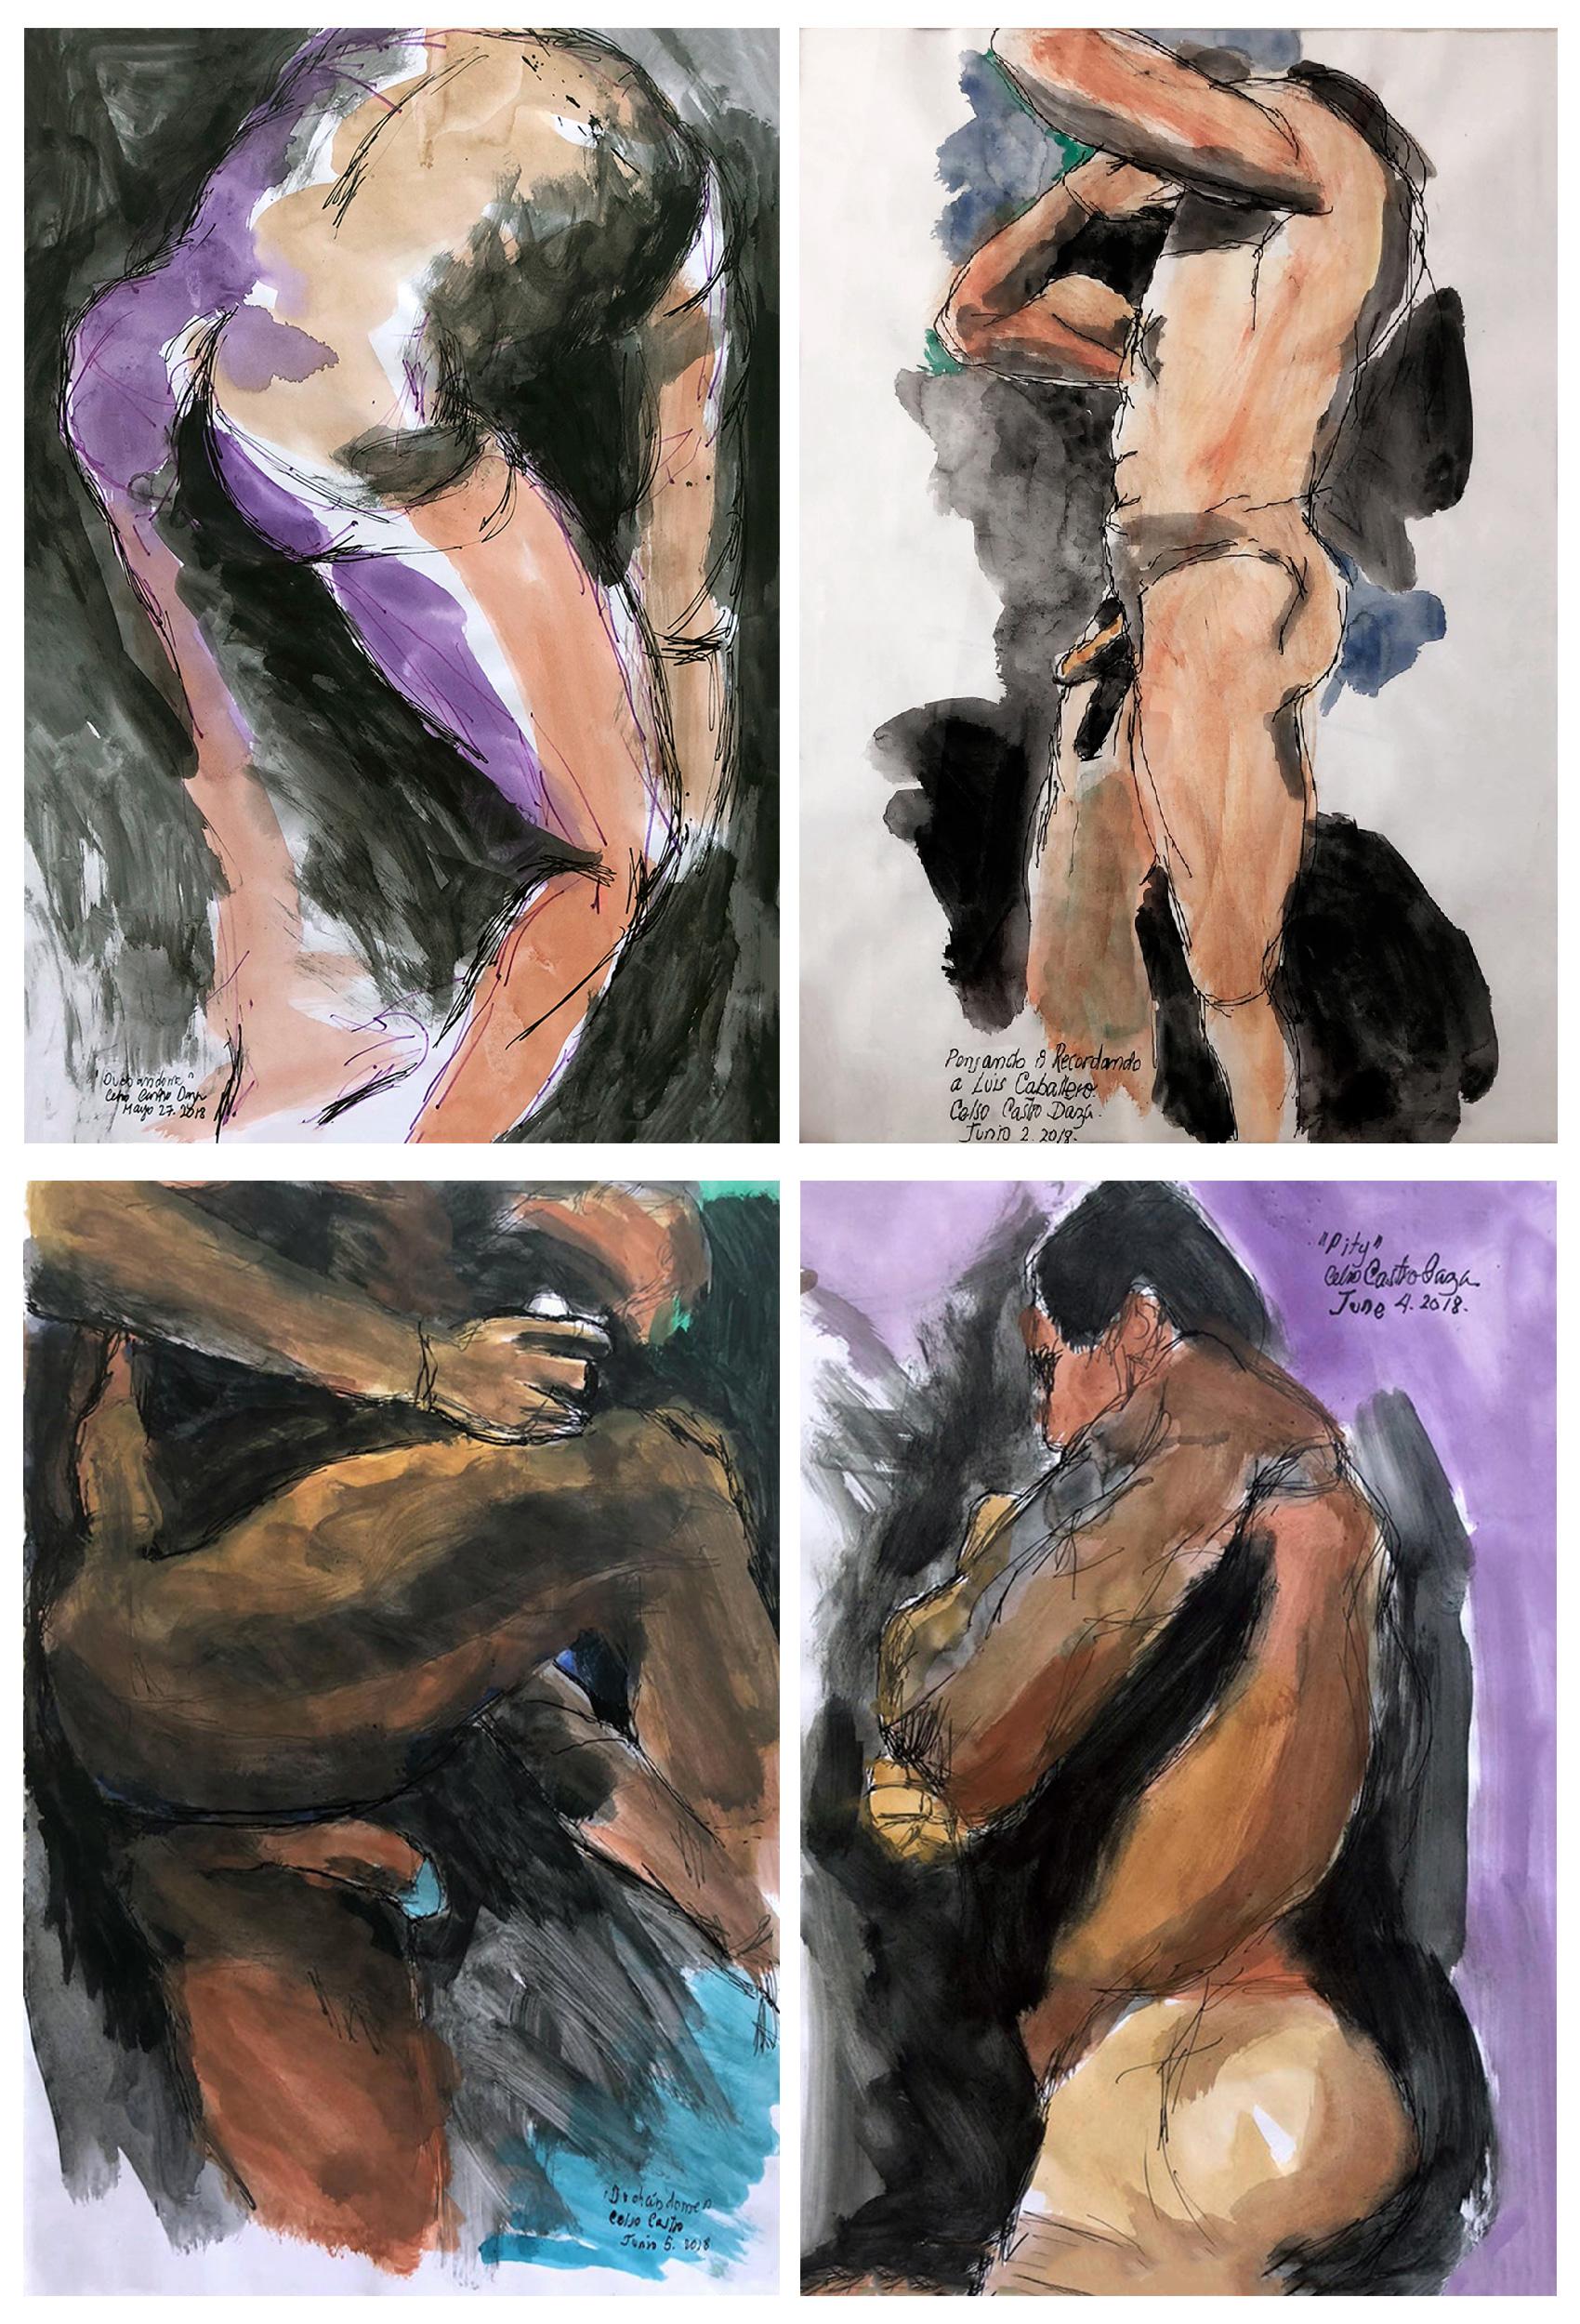 Celso José Castro Daza Figurative Art - From the Duchándome, Nudes Series. Set of 4 Watercolors on archival paper 